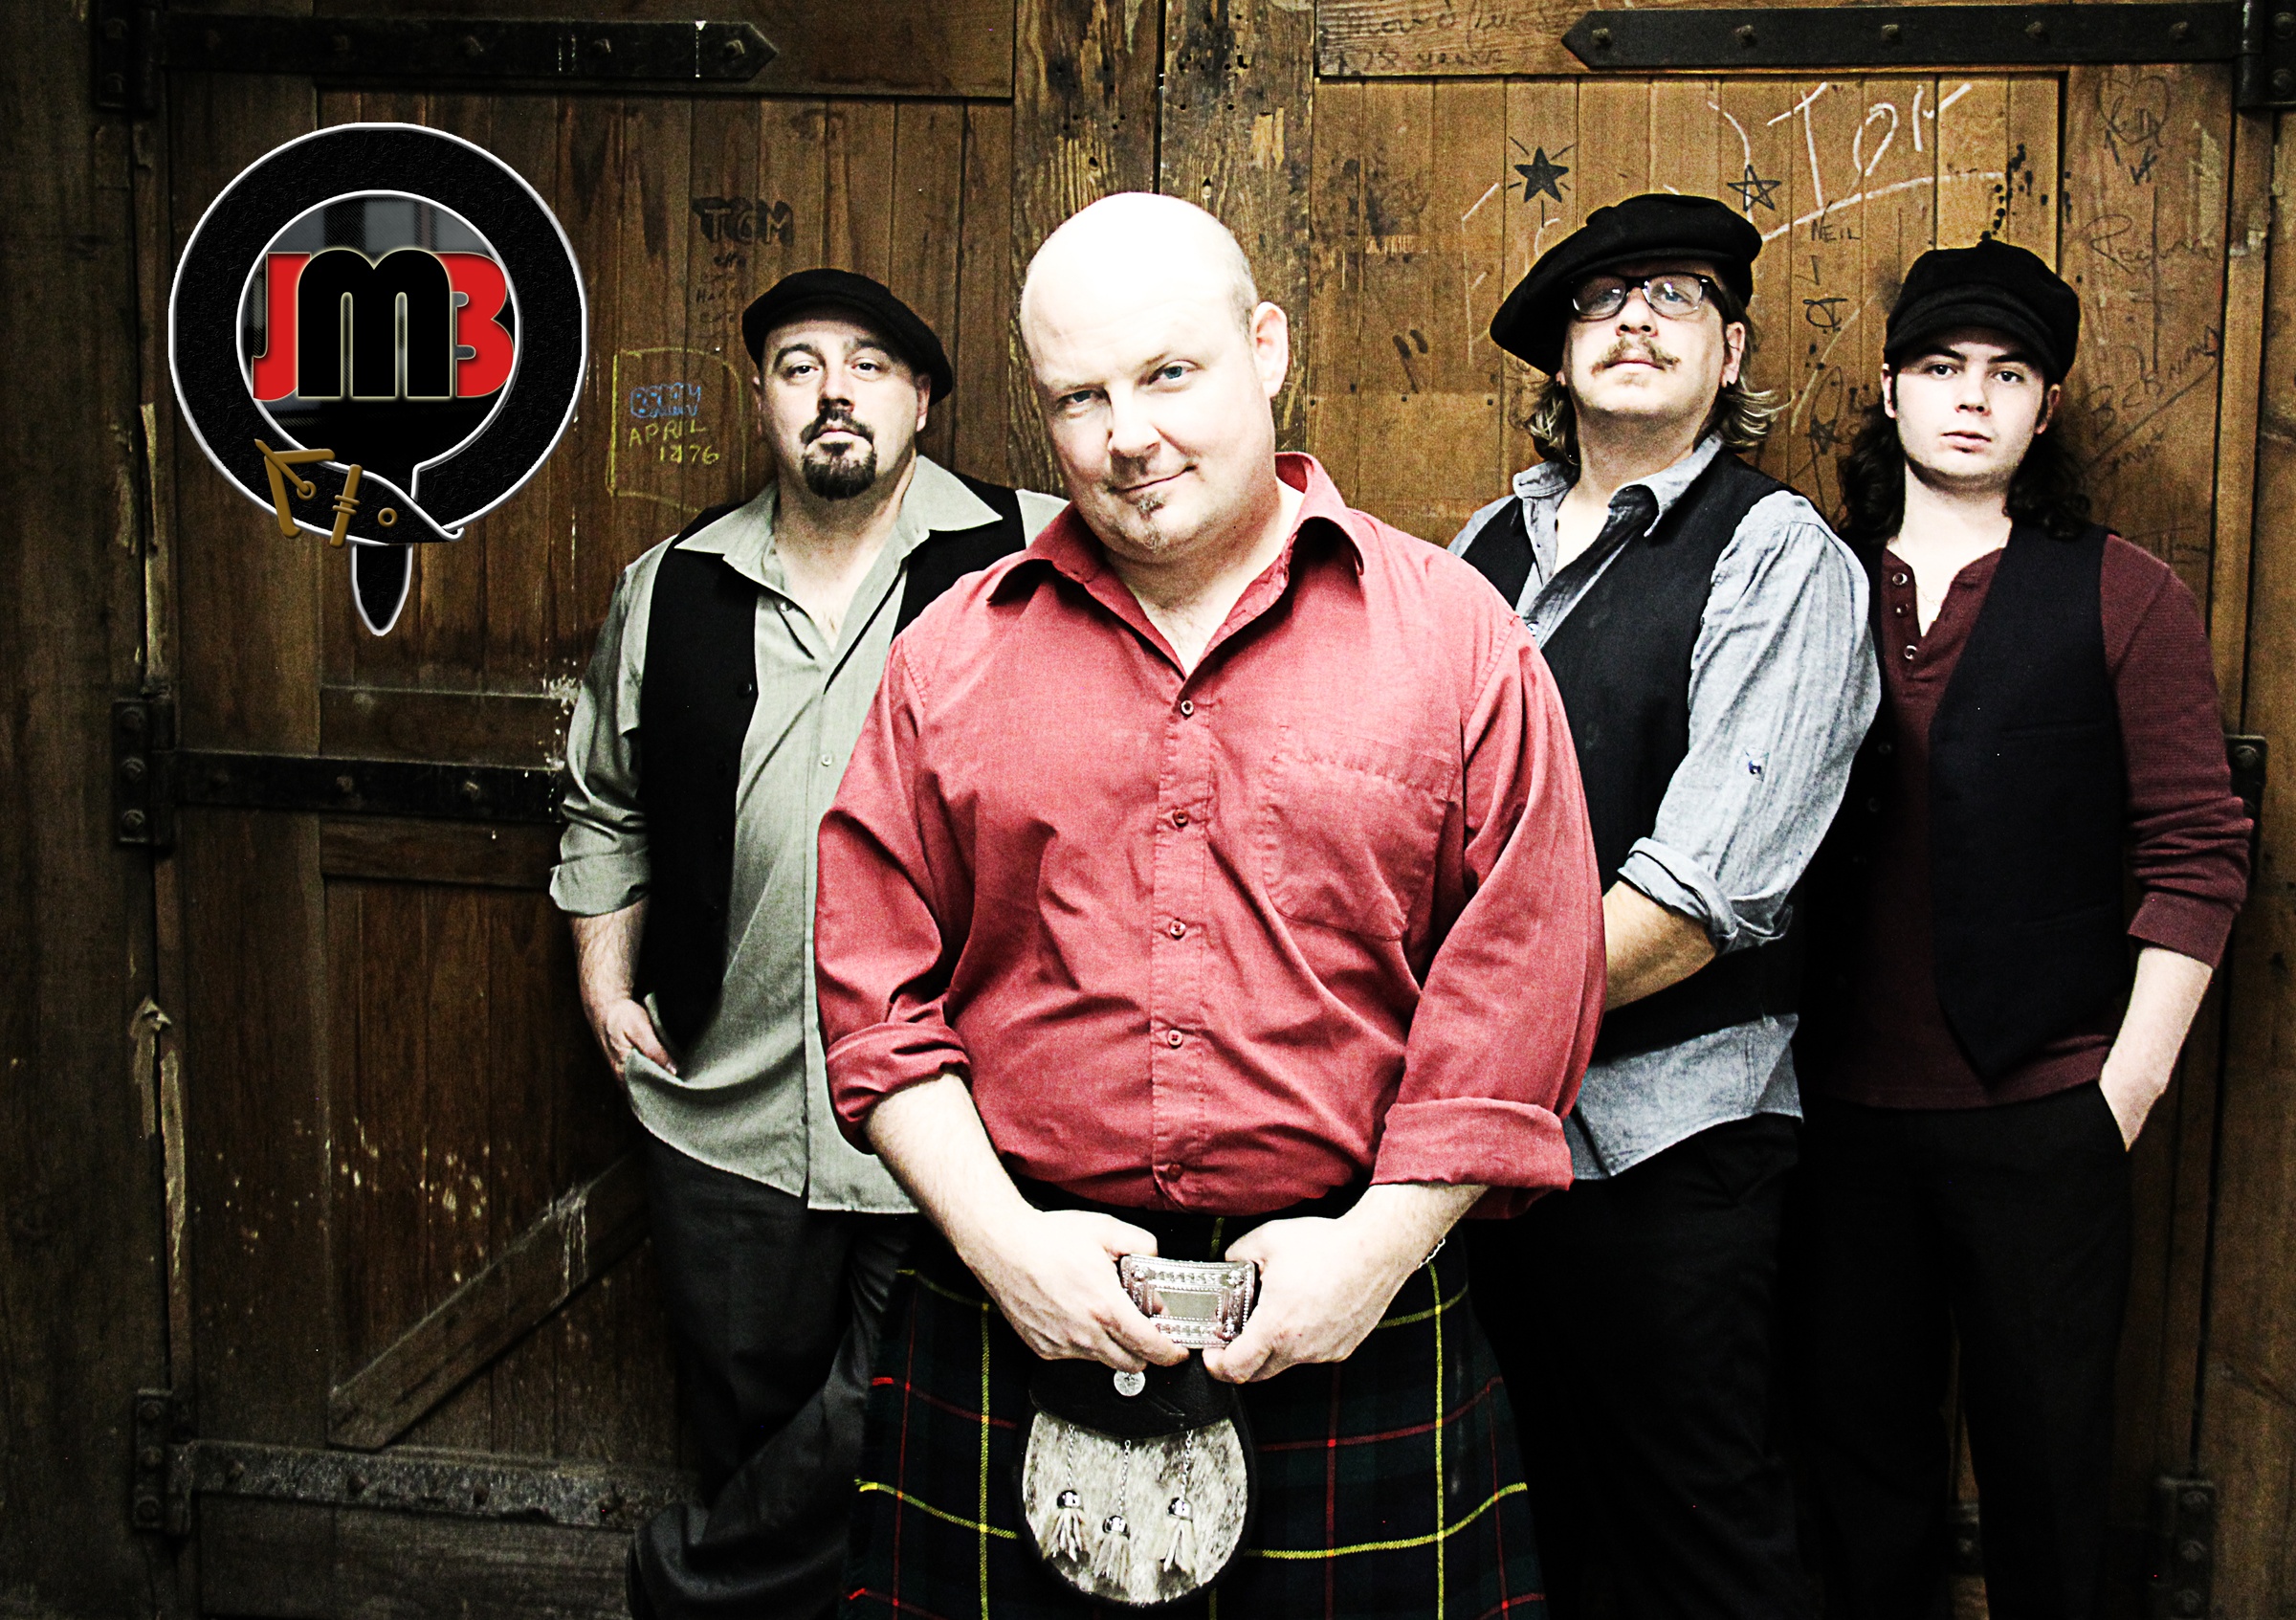 MESMERIZING – The Johnny McCuaig Band performs at Fratter’s on Jan. 16th.